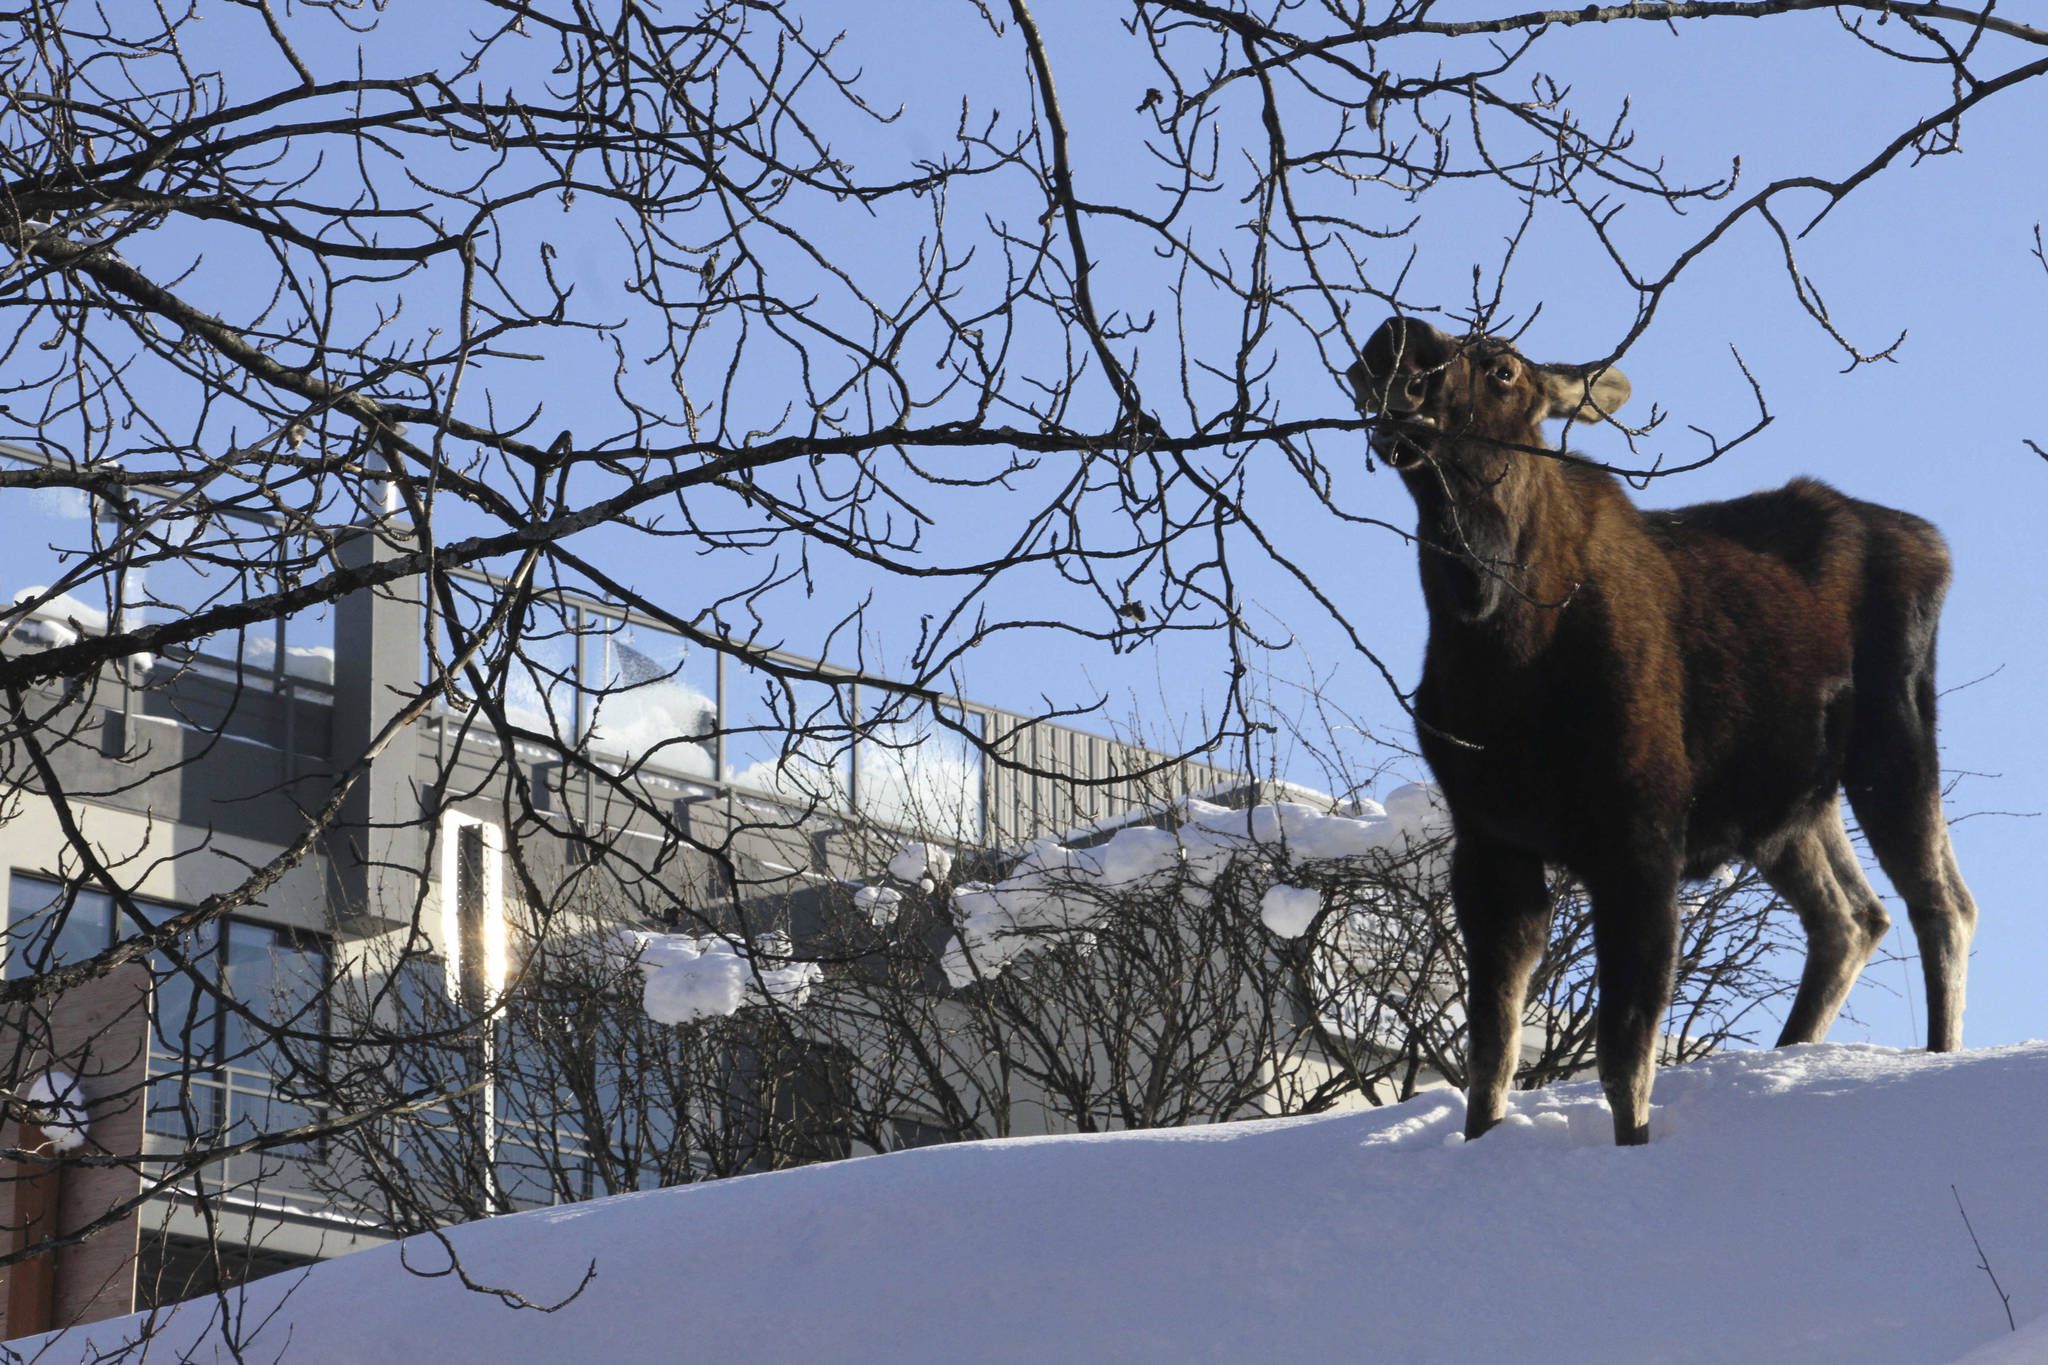 In this February photo, a moose munches on a tree in downtown Anchorage, Alaska. Alaska wildlife officials have a message for residents: Please don’t feed the moose. State Fish and Game officials said Wednesday, April 1, 2020, they’ve seen an uptick in people feeding moose such foods as carrots and apples after a heavy snow season that left many of animals thin and nutritionally vulnerable. Plus, intentionally feeding moose is illegal, and can result in a misdemeanor violation of state game feeding laws. Unintentional feeding can result in a $300 ticket from Alaska Wildlife Troopers. (AP Photo | Mark Thiessen, File)